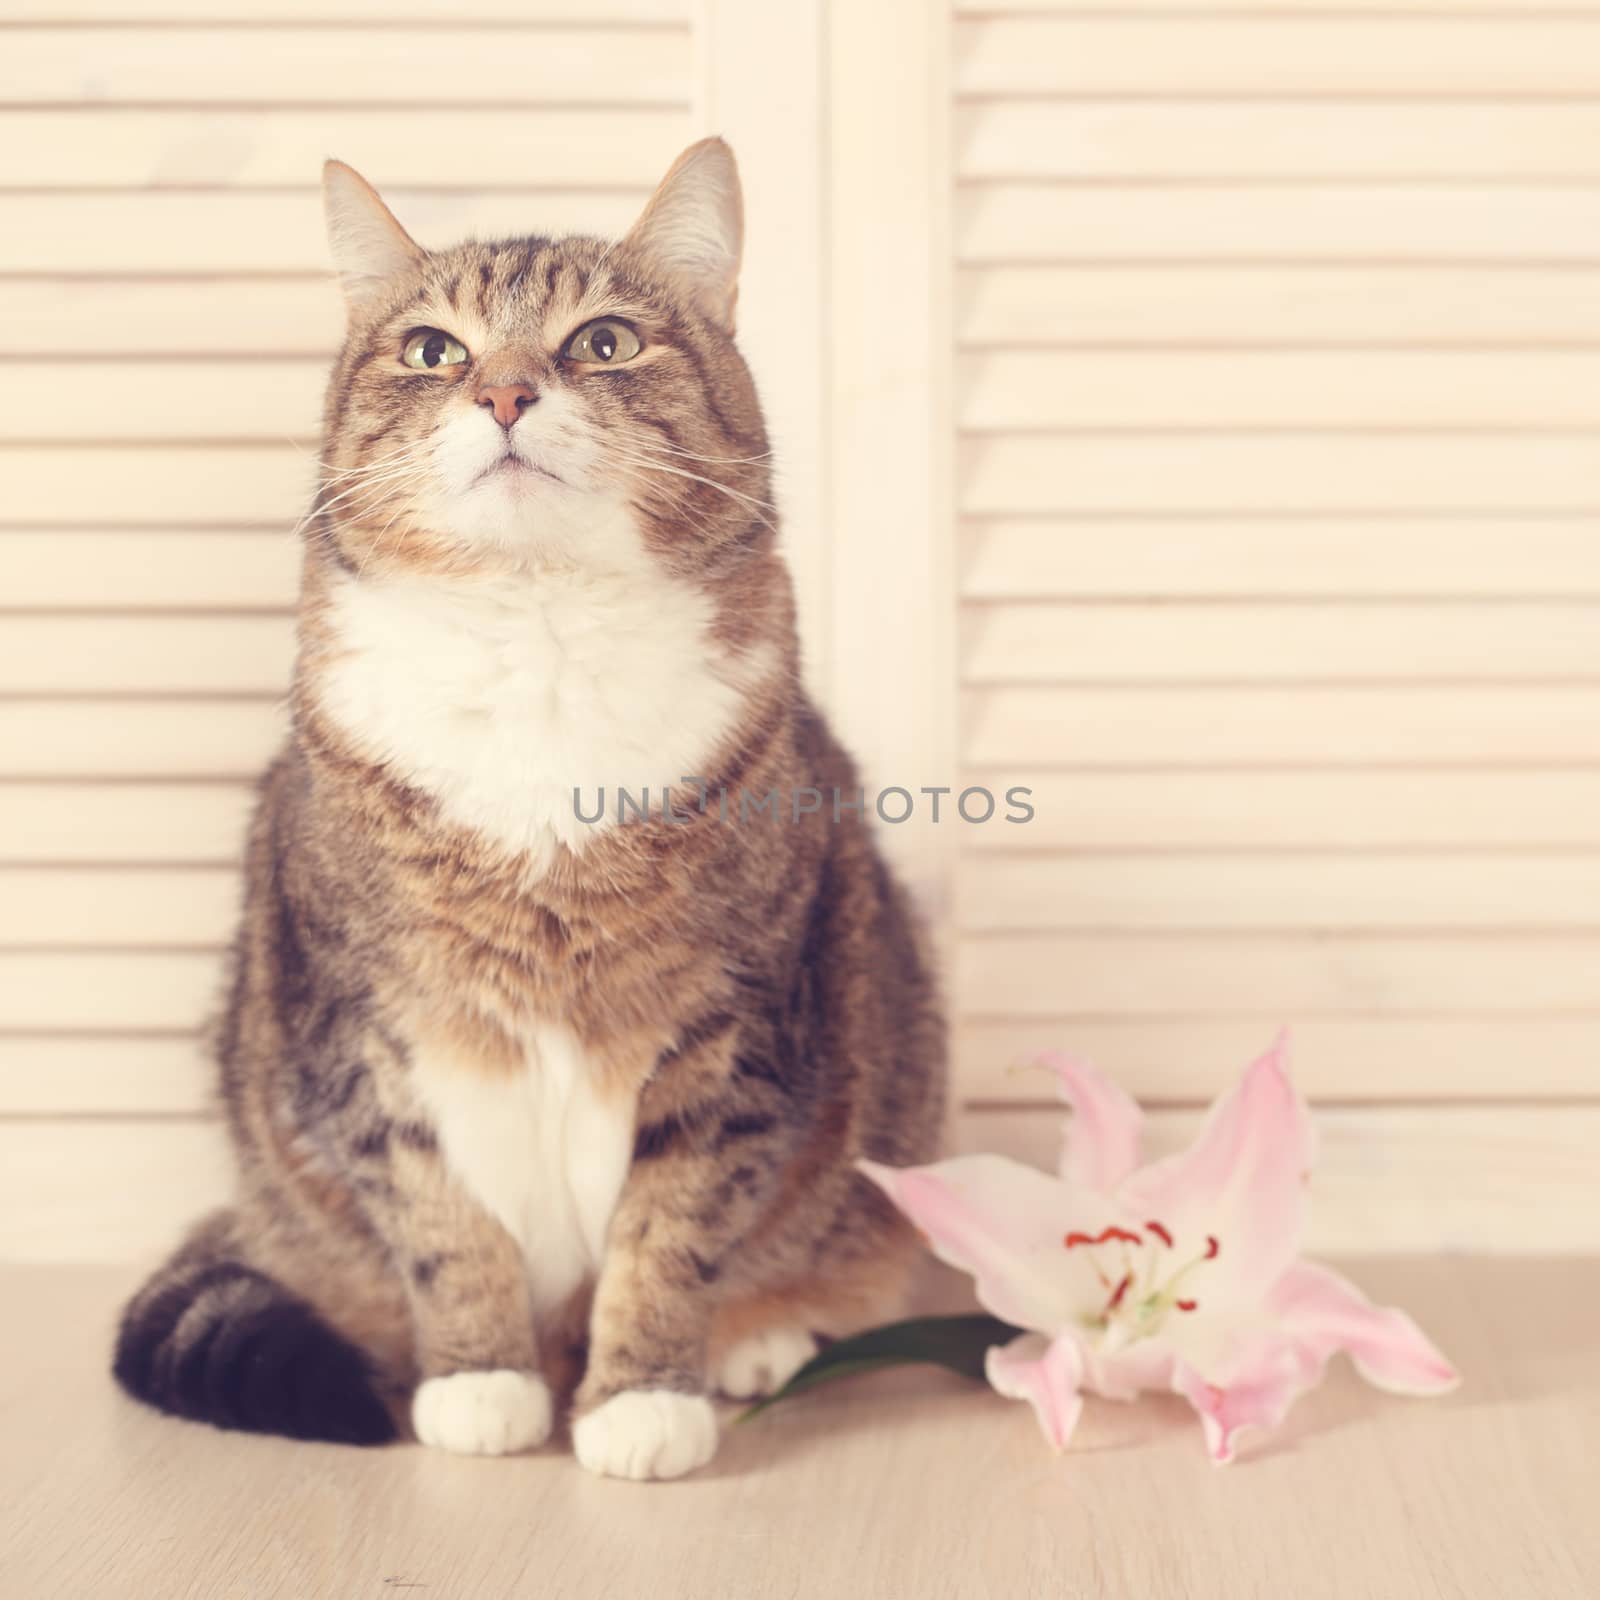 Cat with lily flower sitting on wooden background